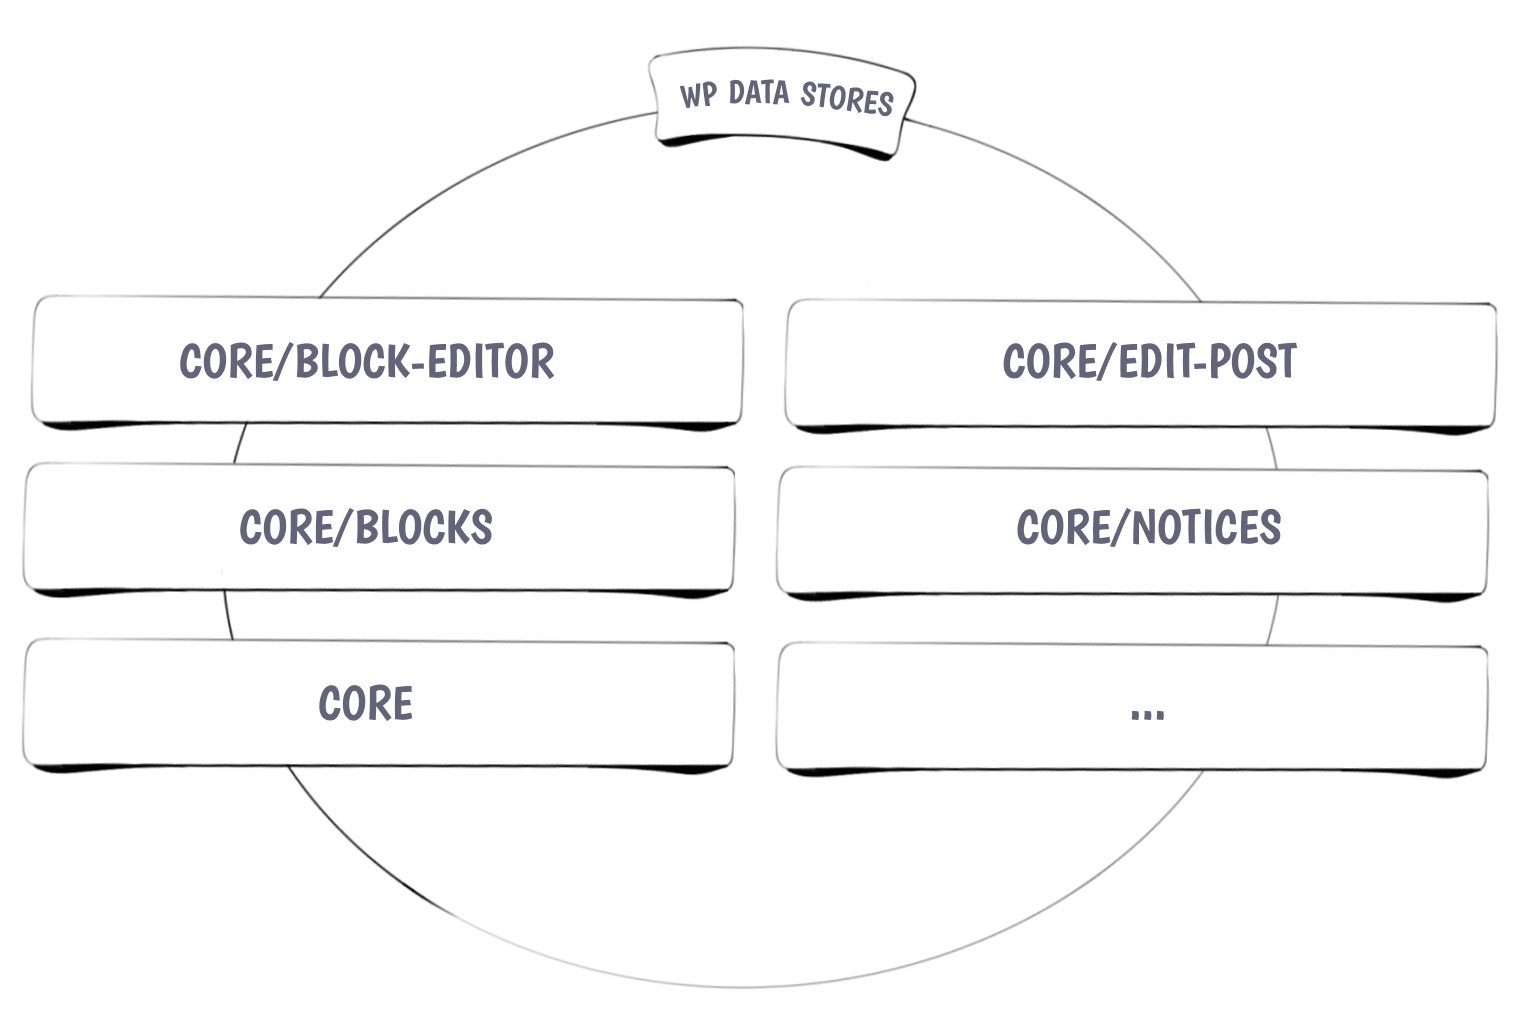 List of the various Core Data Stores